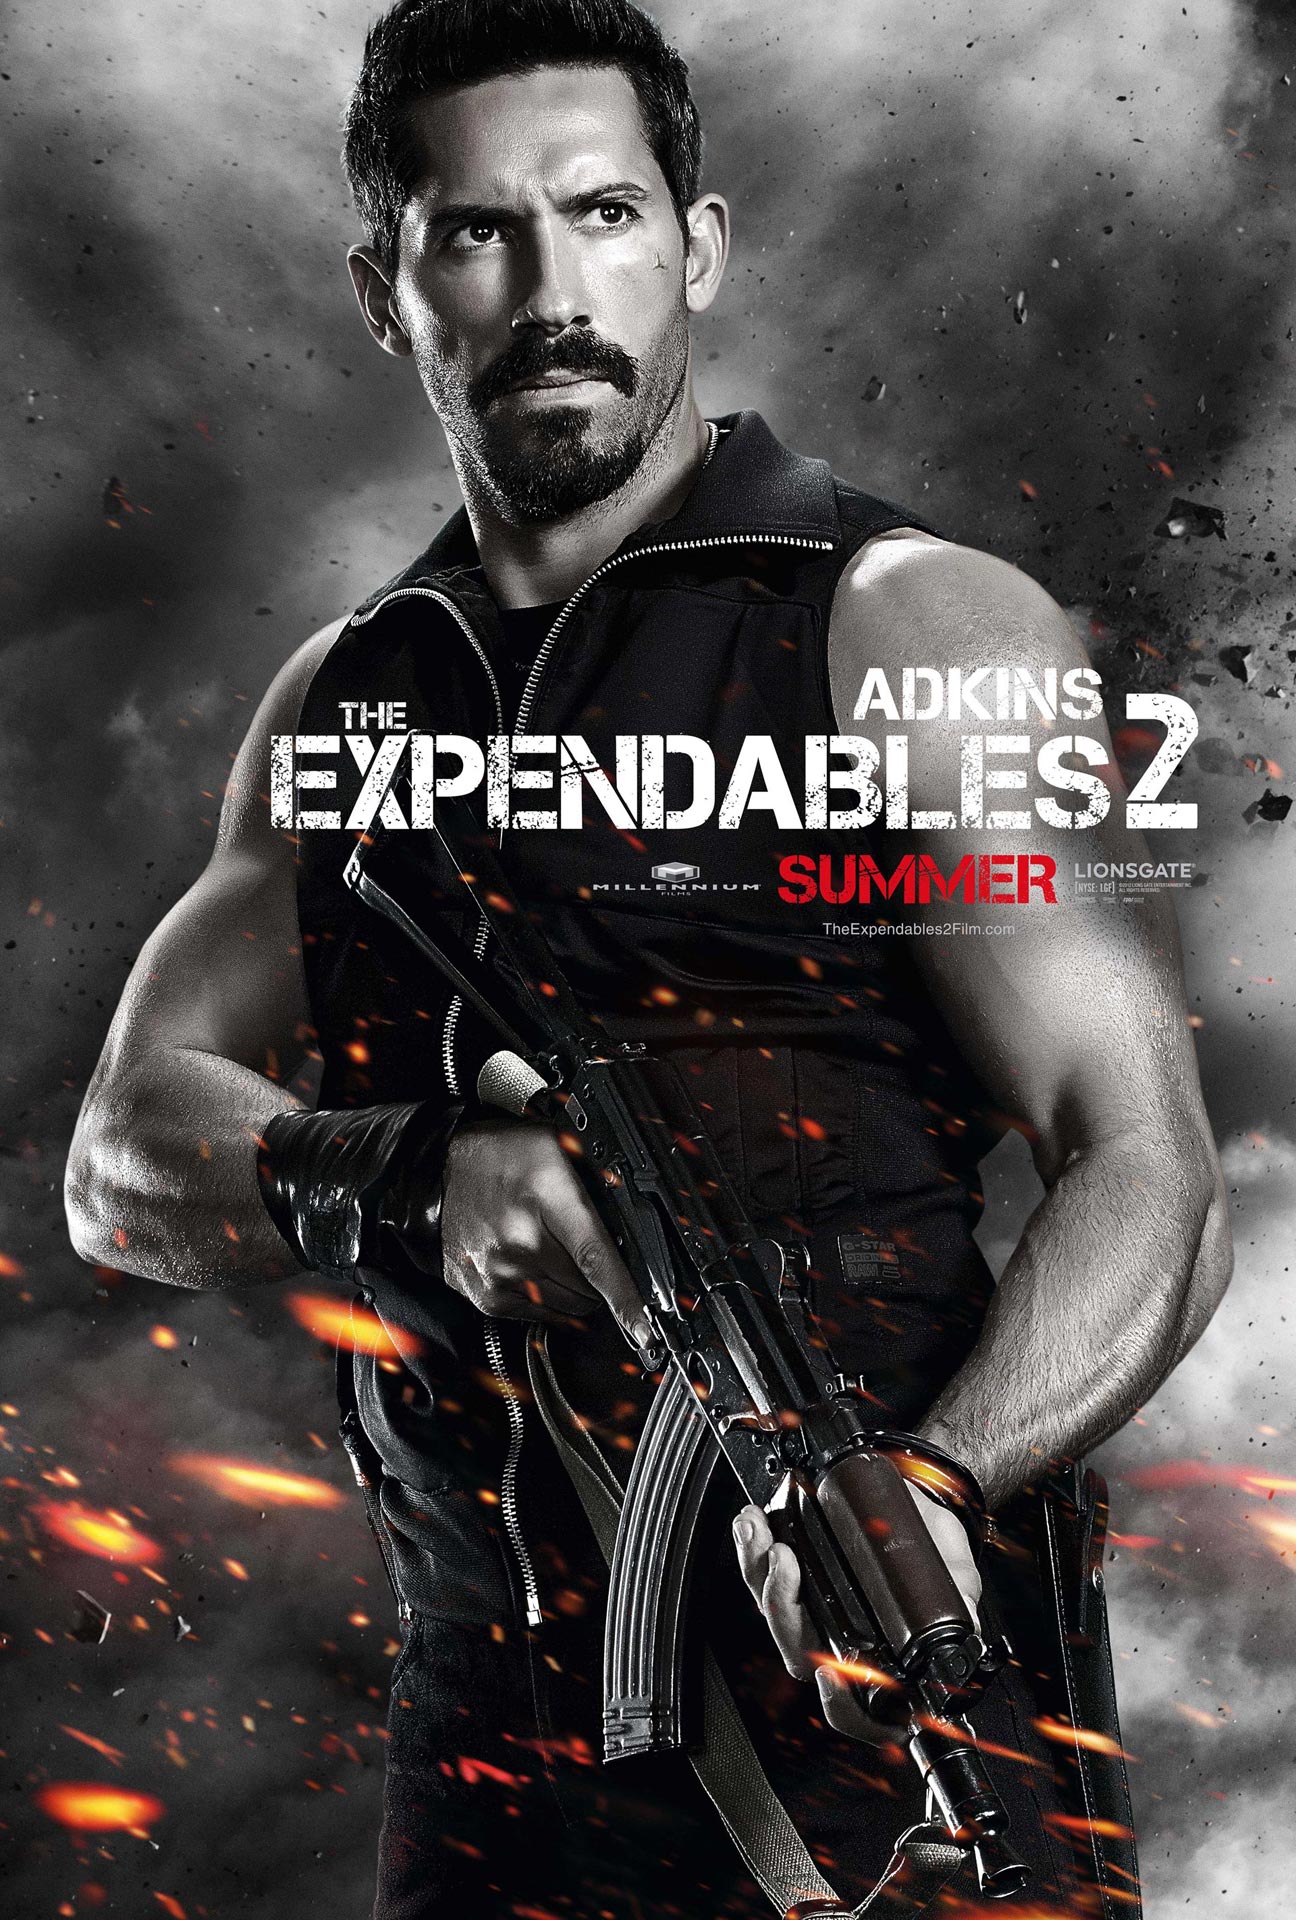  - Expendables-2-Hector-Scott-Adkins